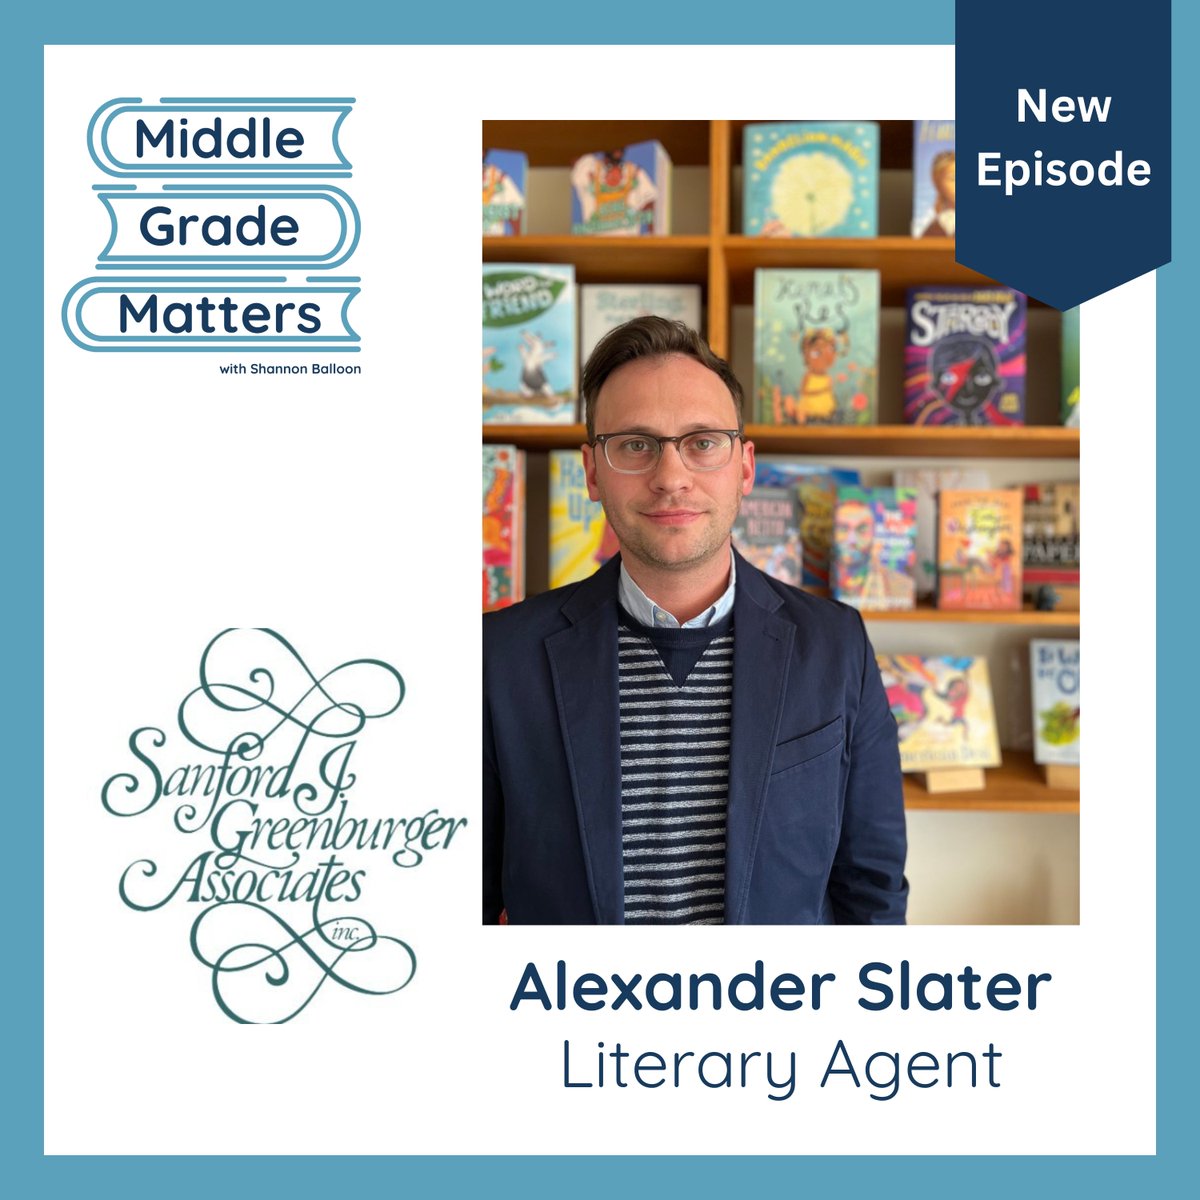 Airing Now! Literary Agent Alexander Slater talks middle grade publishing, shares insights into his typical day as a literary agent, and offers advice for writers.  Catch it here: shannonballoon.com/podcast #middlegradebooks #writingcommunity